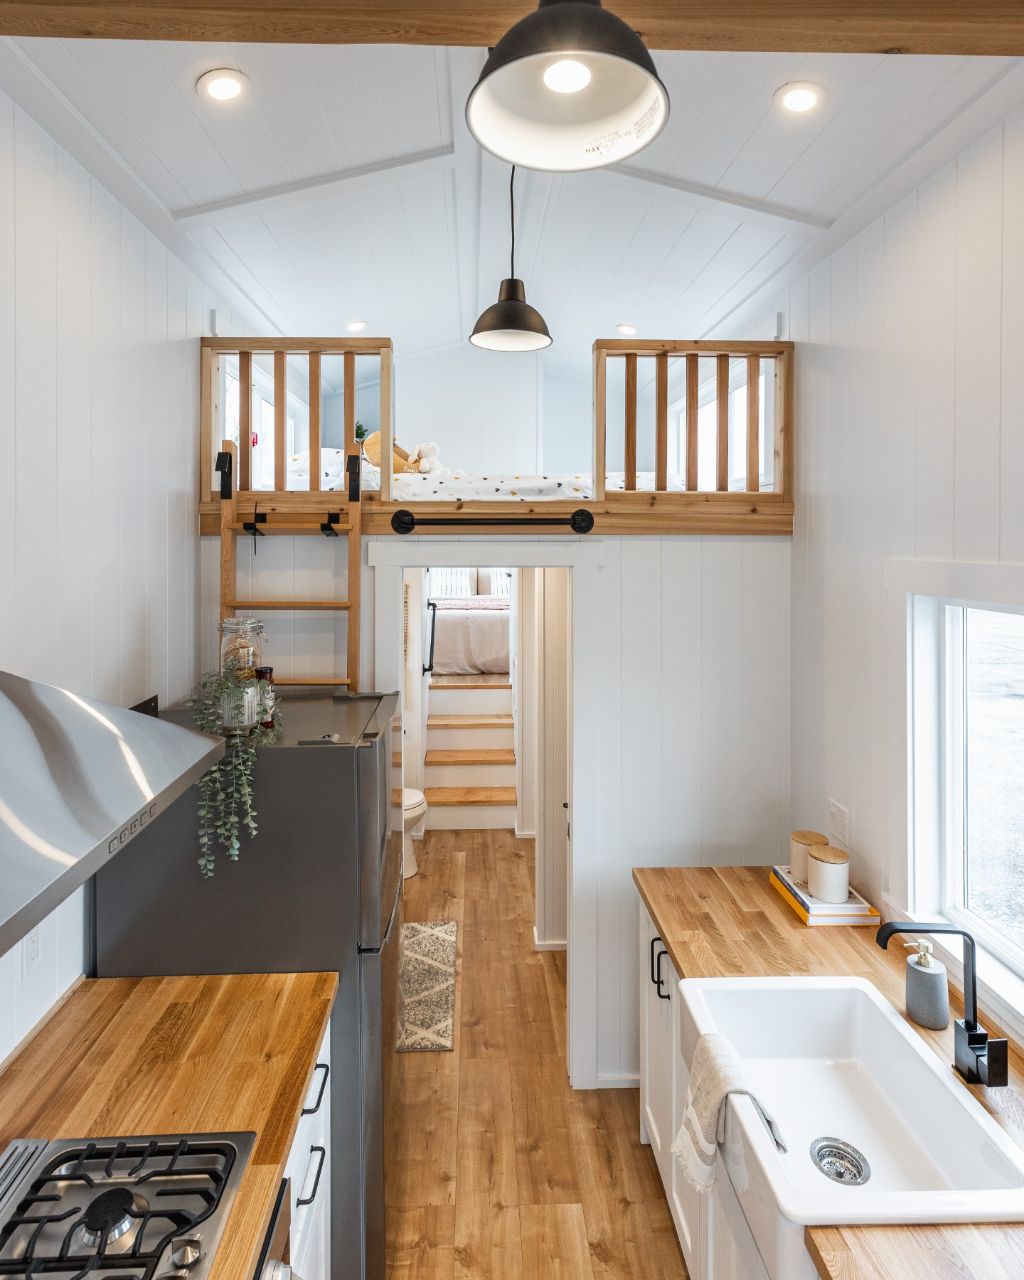 View From Kitchen to Loft - Canada Goose Arctic Edition by Mint Tiny House Company